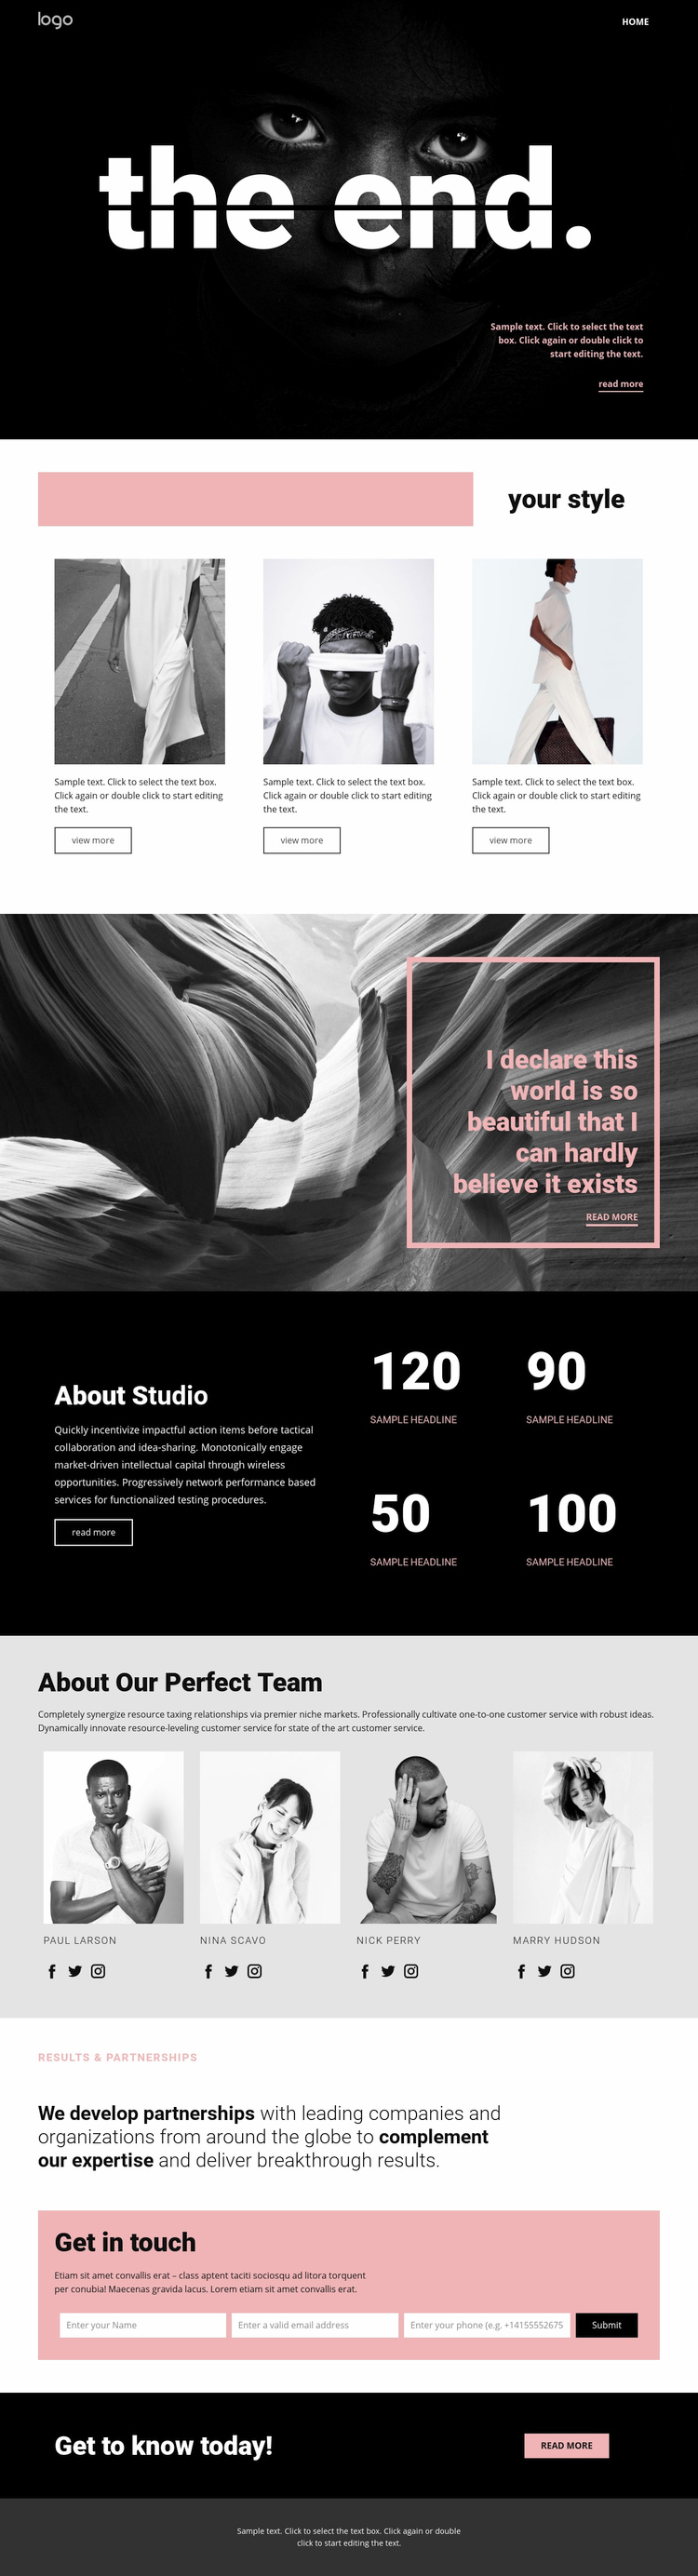 Perfecting styles of art Squarespace Template Alternative